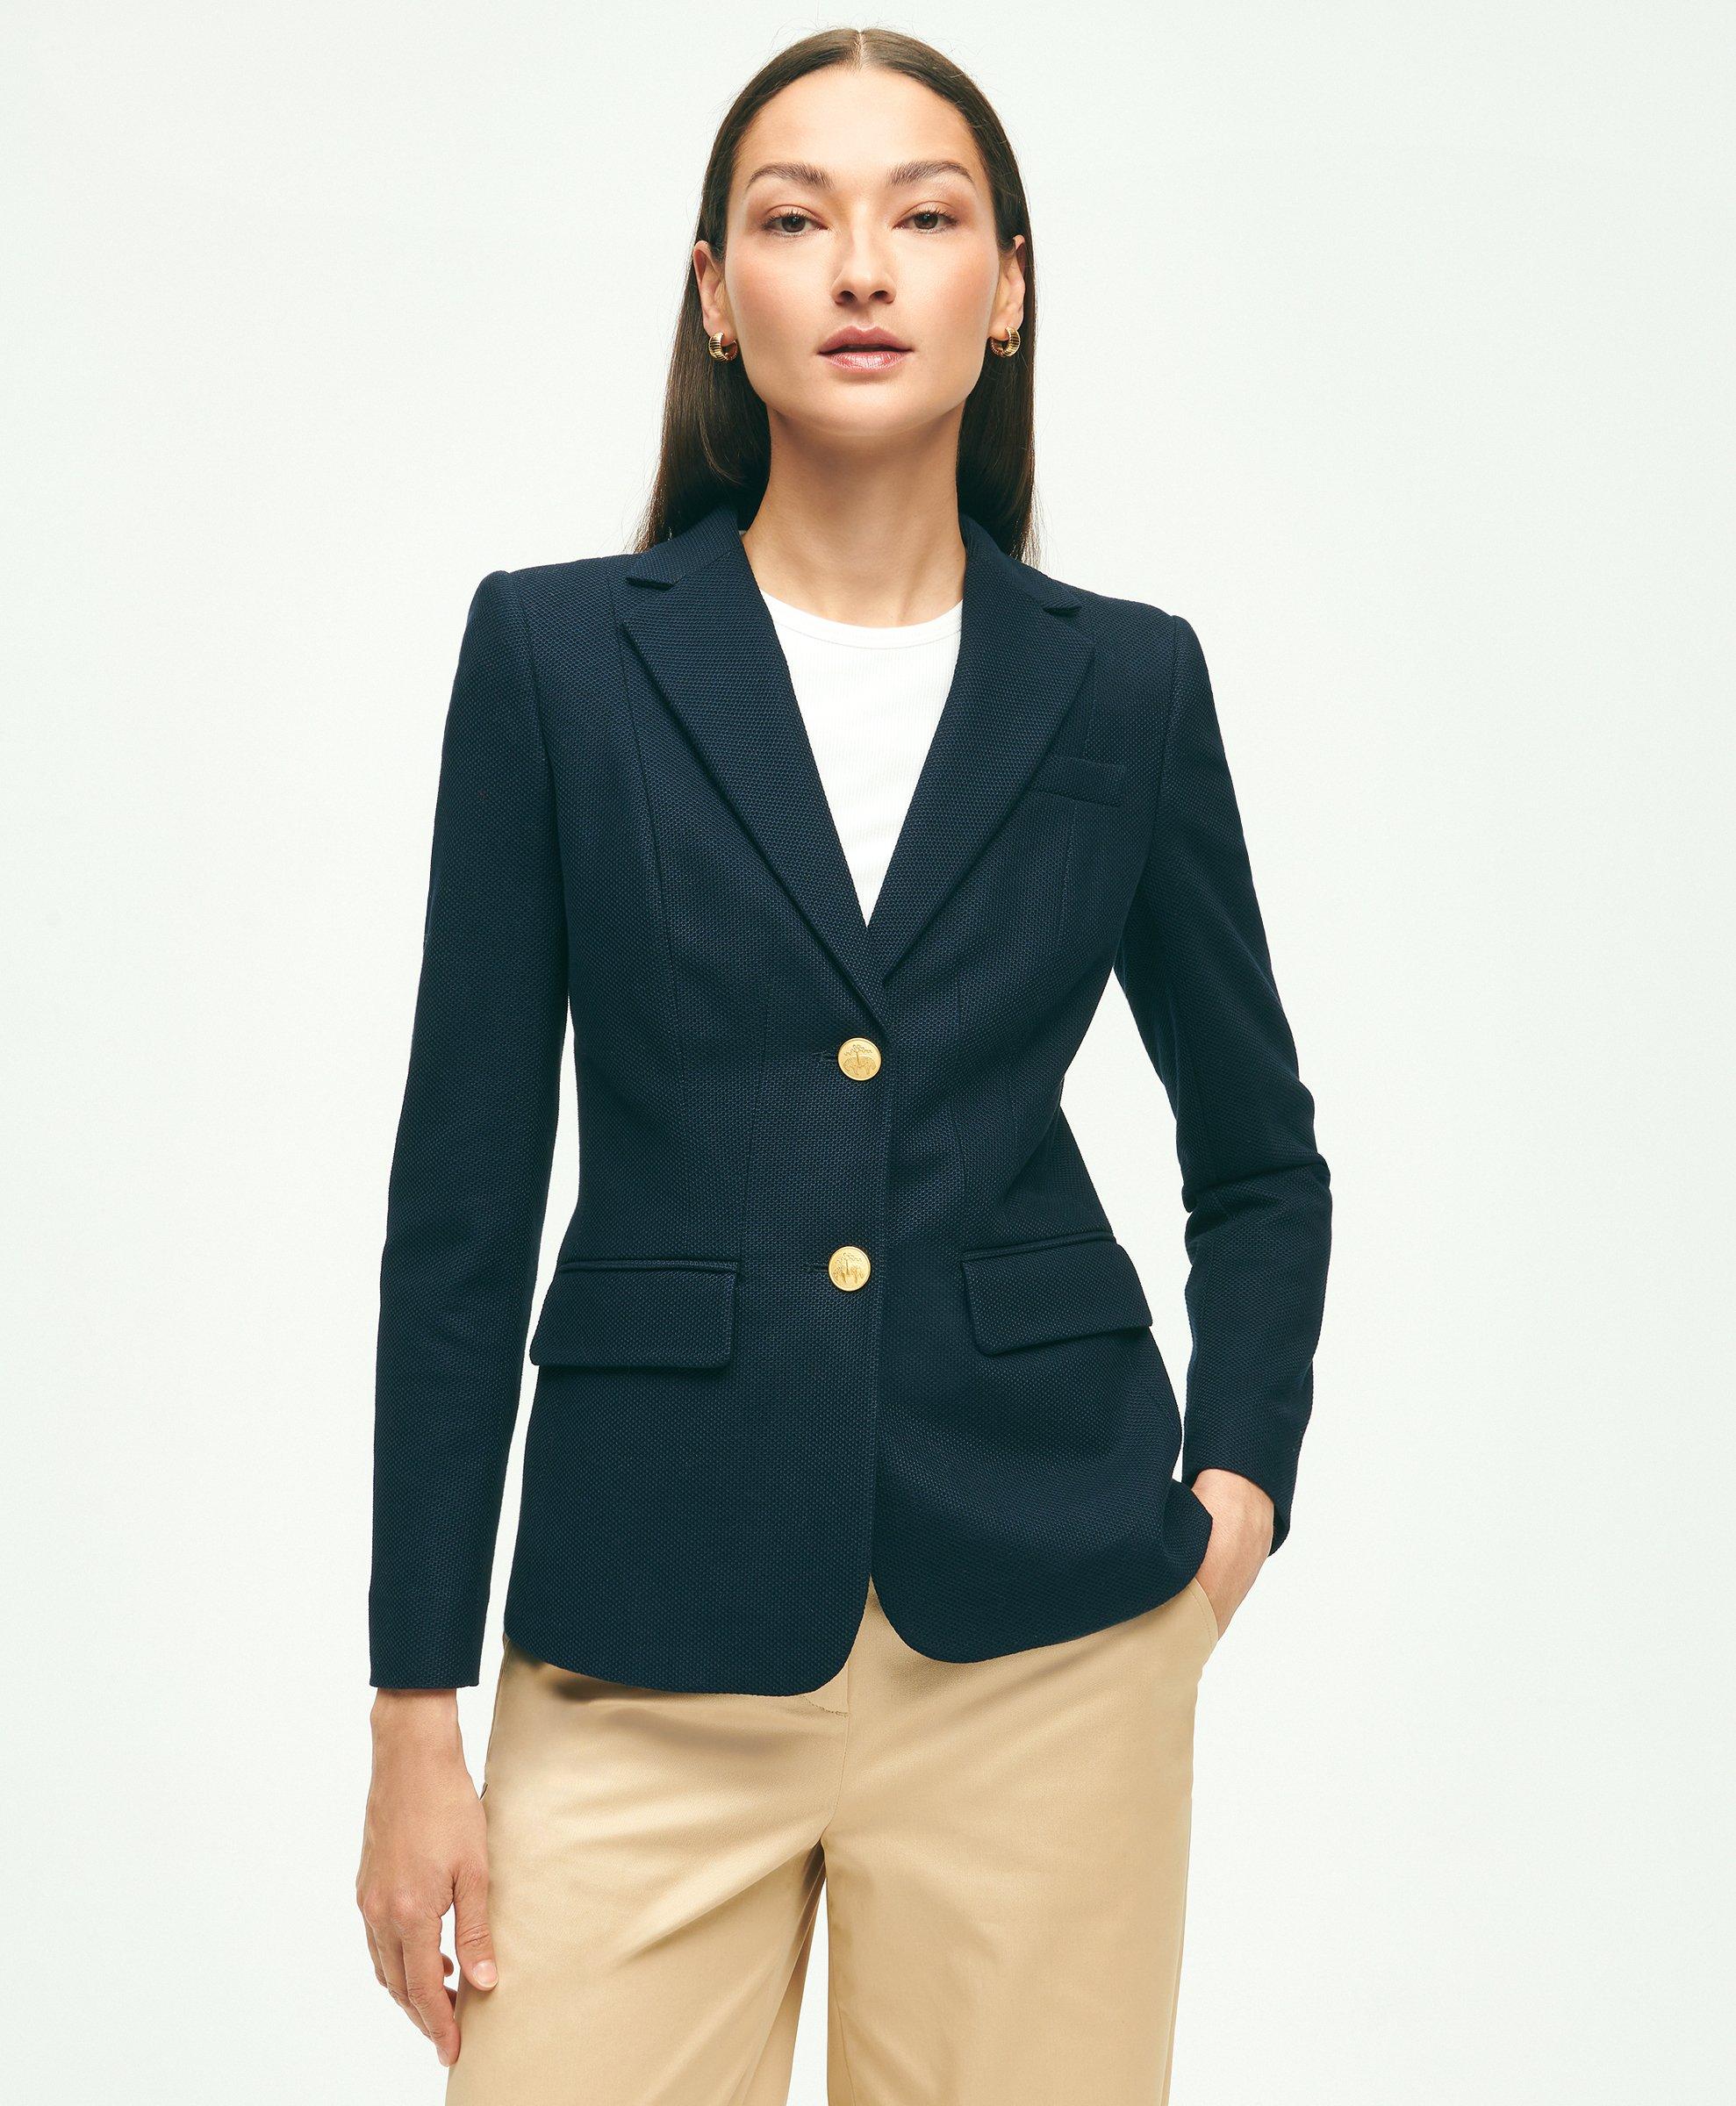 Shop the Women's Jackets and Blazers Sale